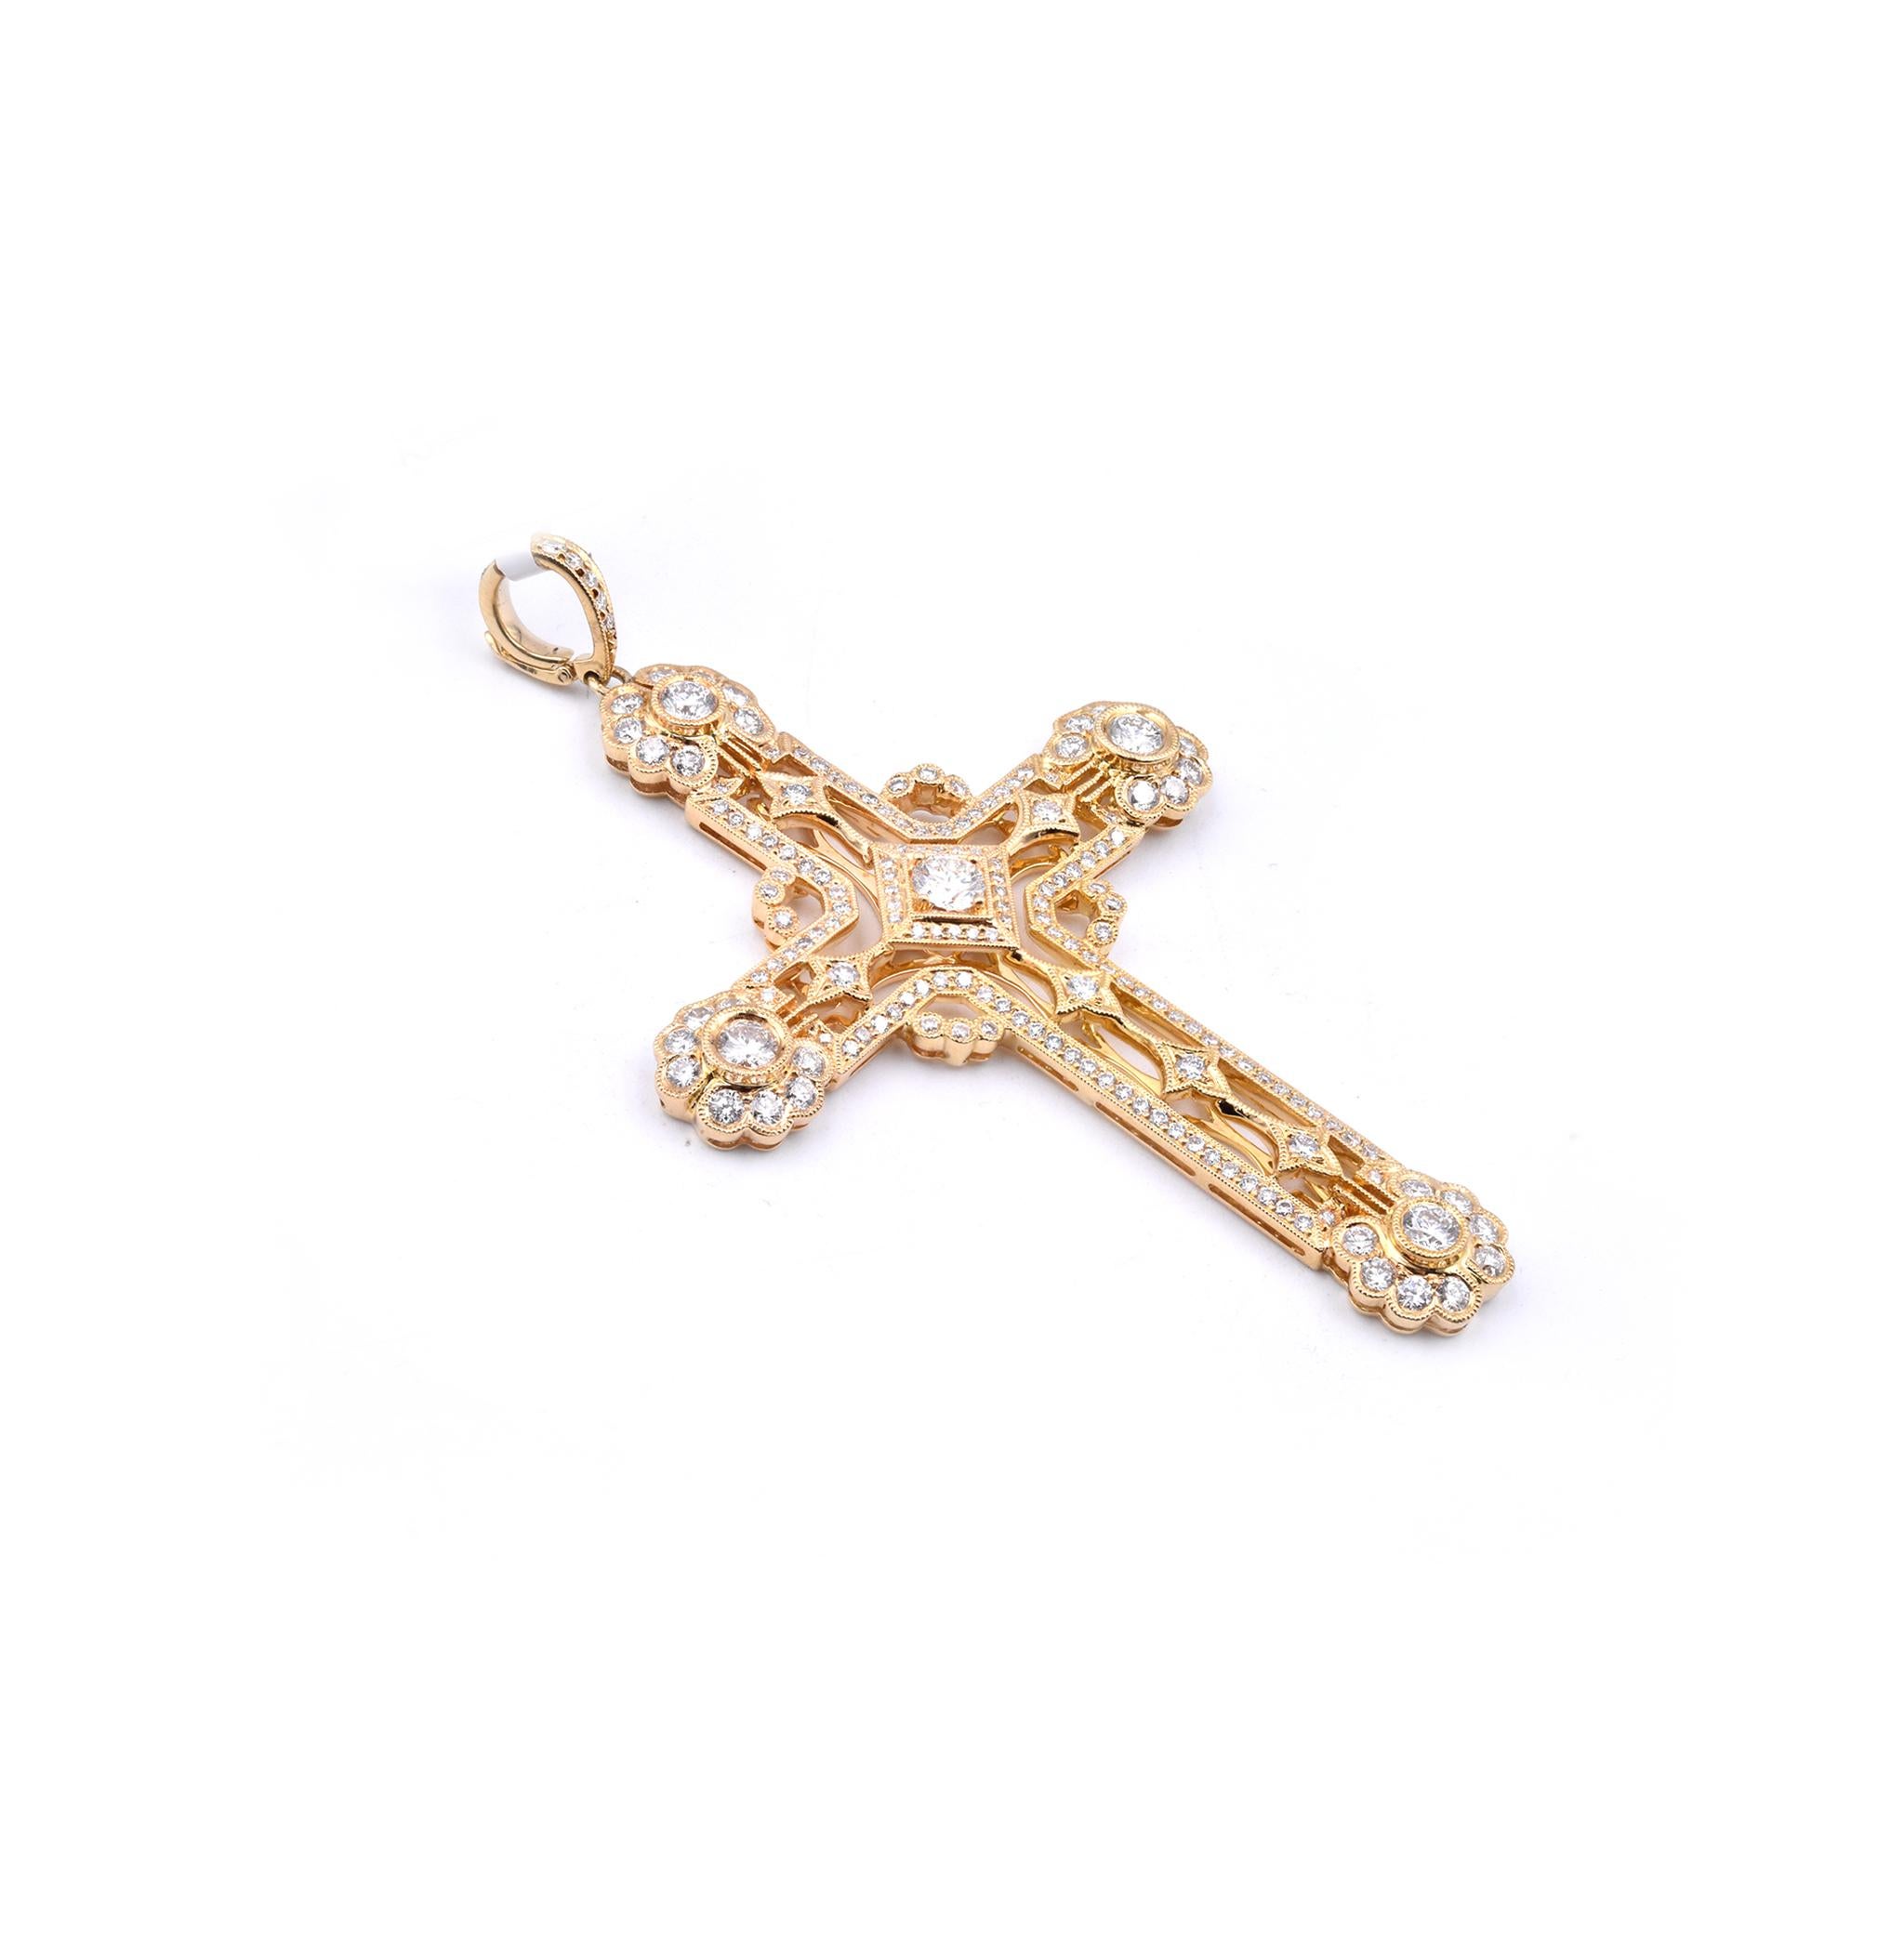 Designer: custom 
Material: 18K yellow gold
Diamonds: 172 round cut = 3.10cttw
Color: H
Clarity: SI1
Dimensions: cross measures 77 X 46mm
Weight: 15.96 grams